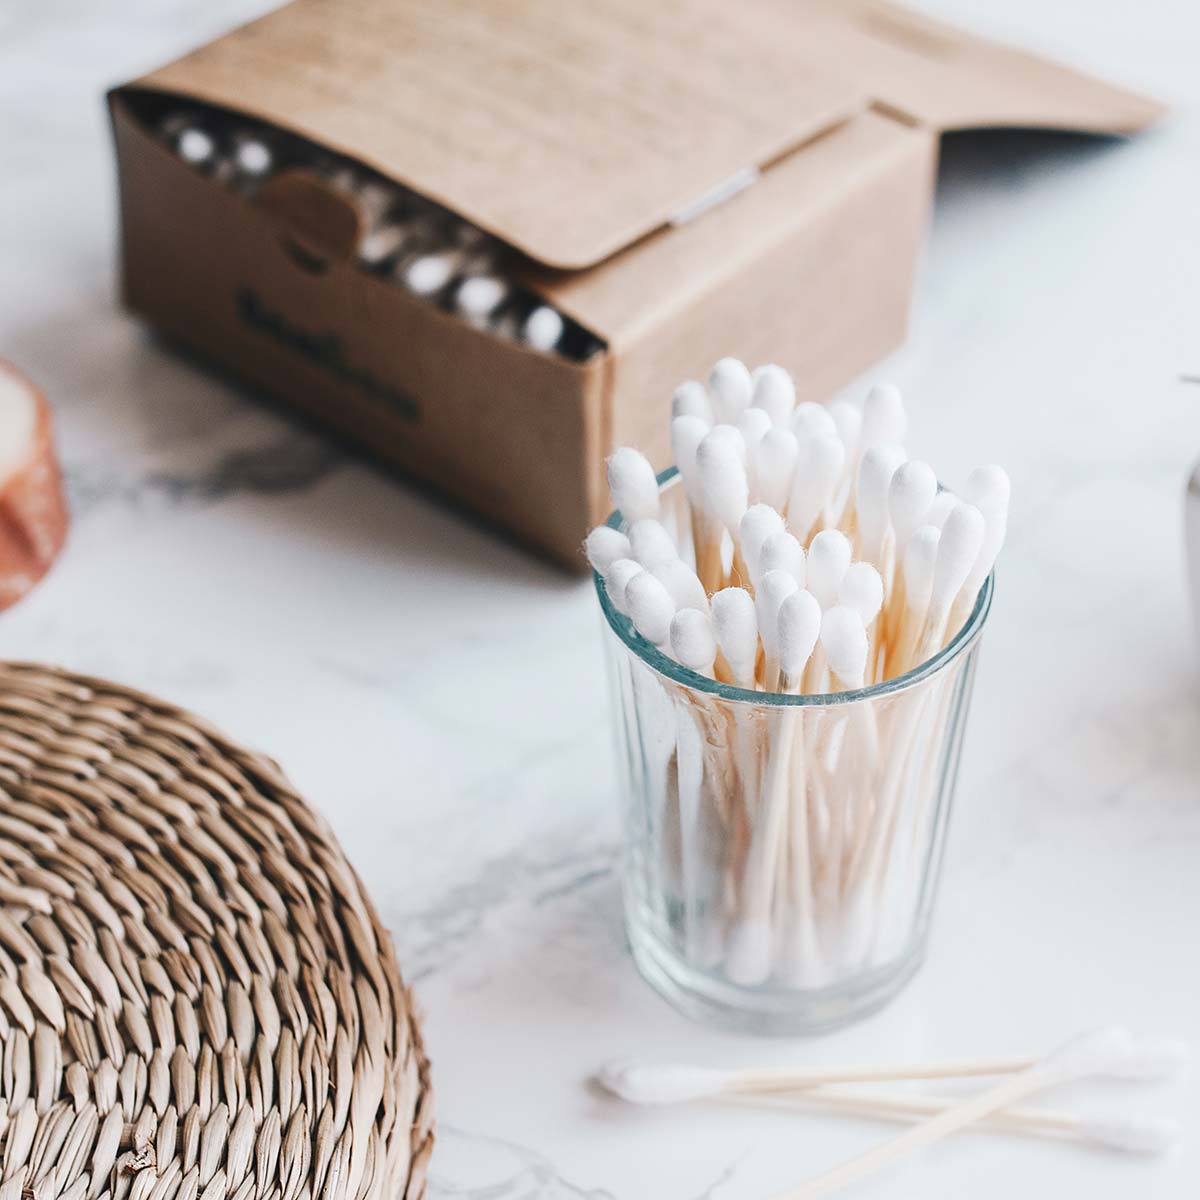 Bamboo Cotton Buds Box (200 pieces)